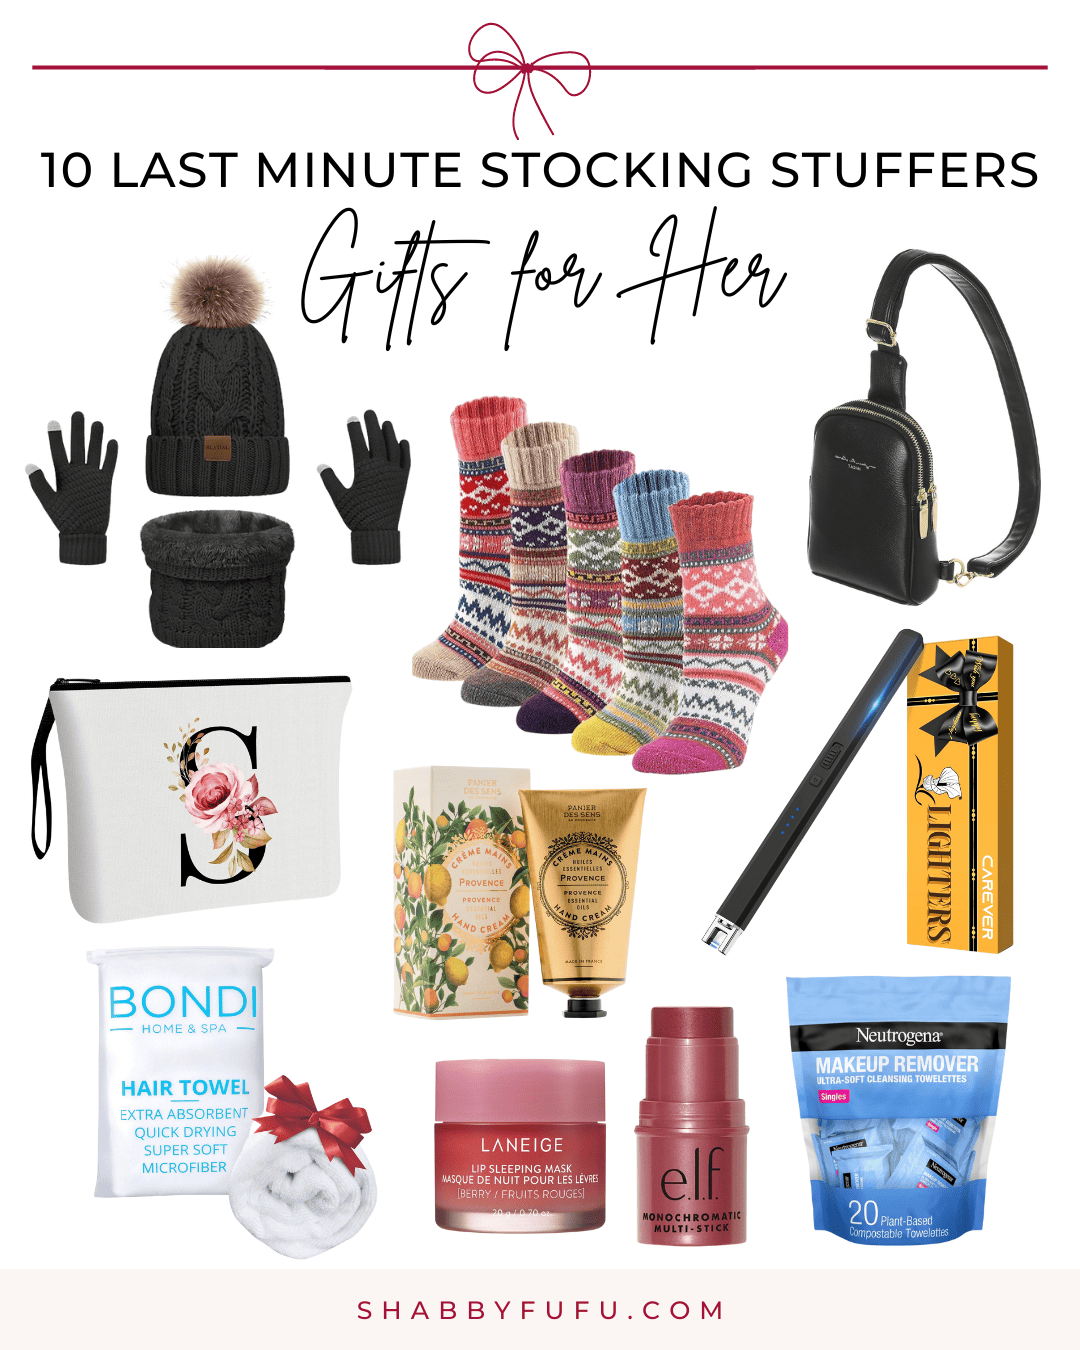 Pinterest decorative collage featuring items and products titled "10 Last Minute Stocking Stuffers For Her"